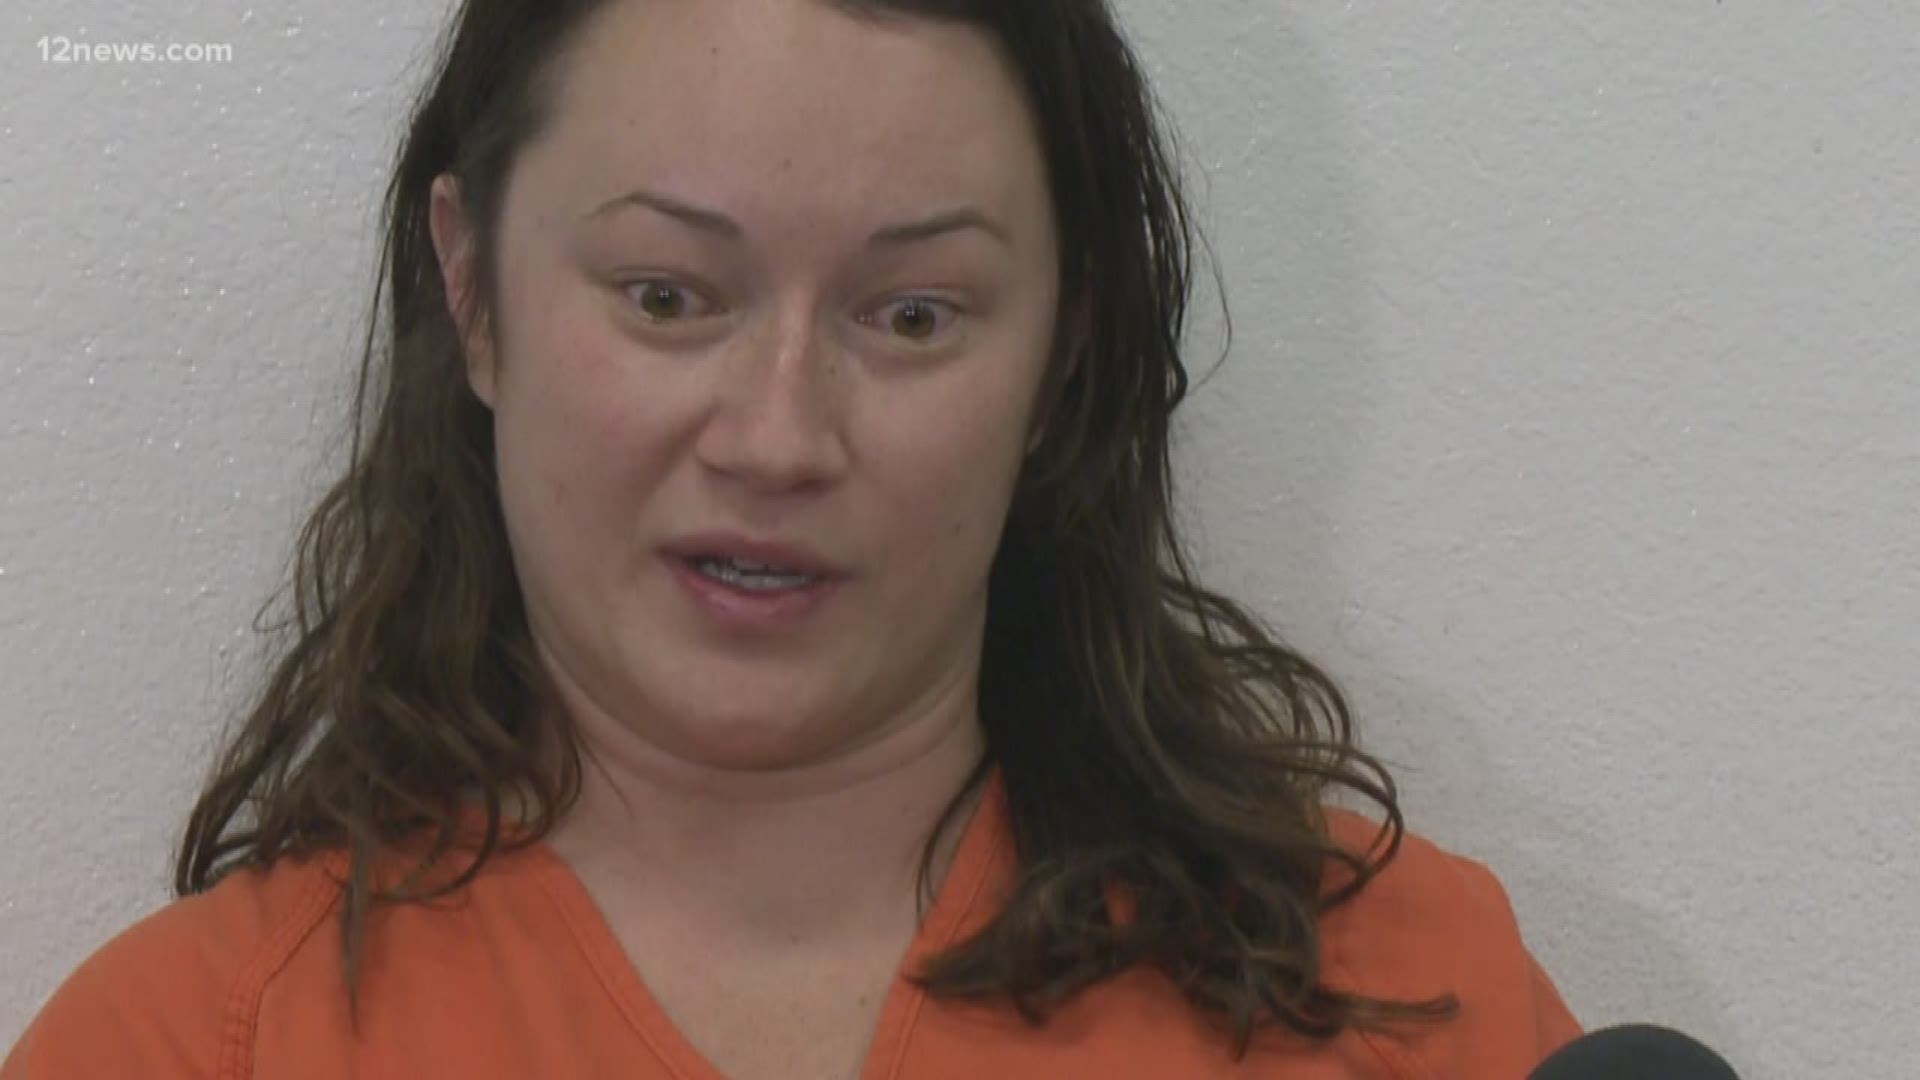 The woman accused of stalking a wealthy business man is sharing her side of the story.